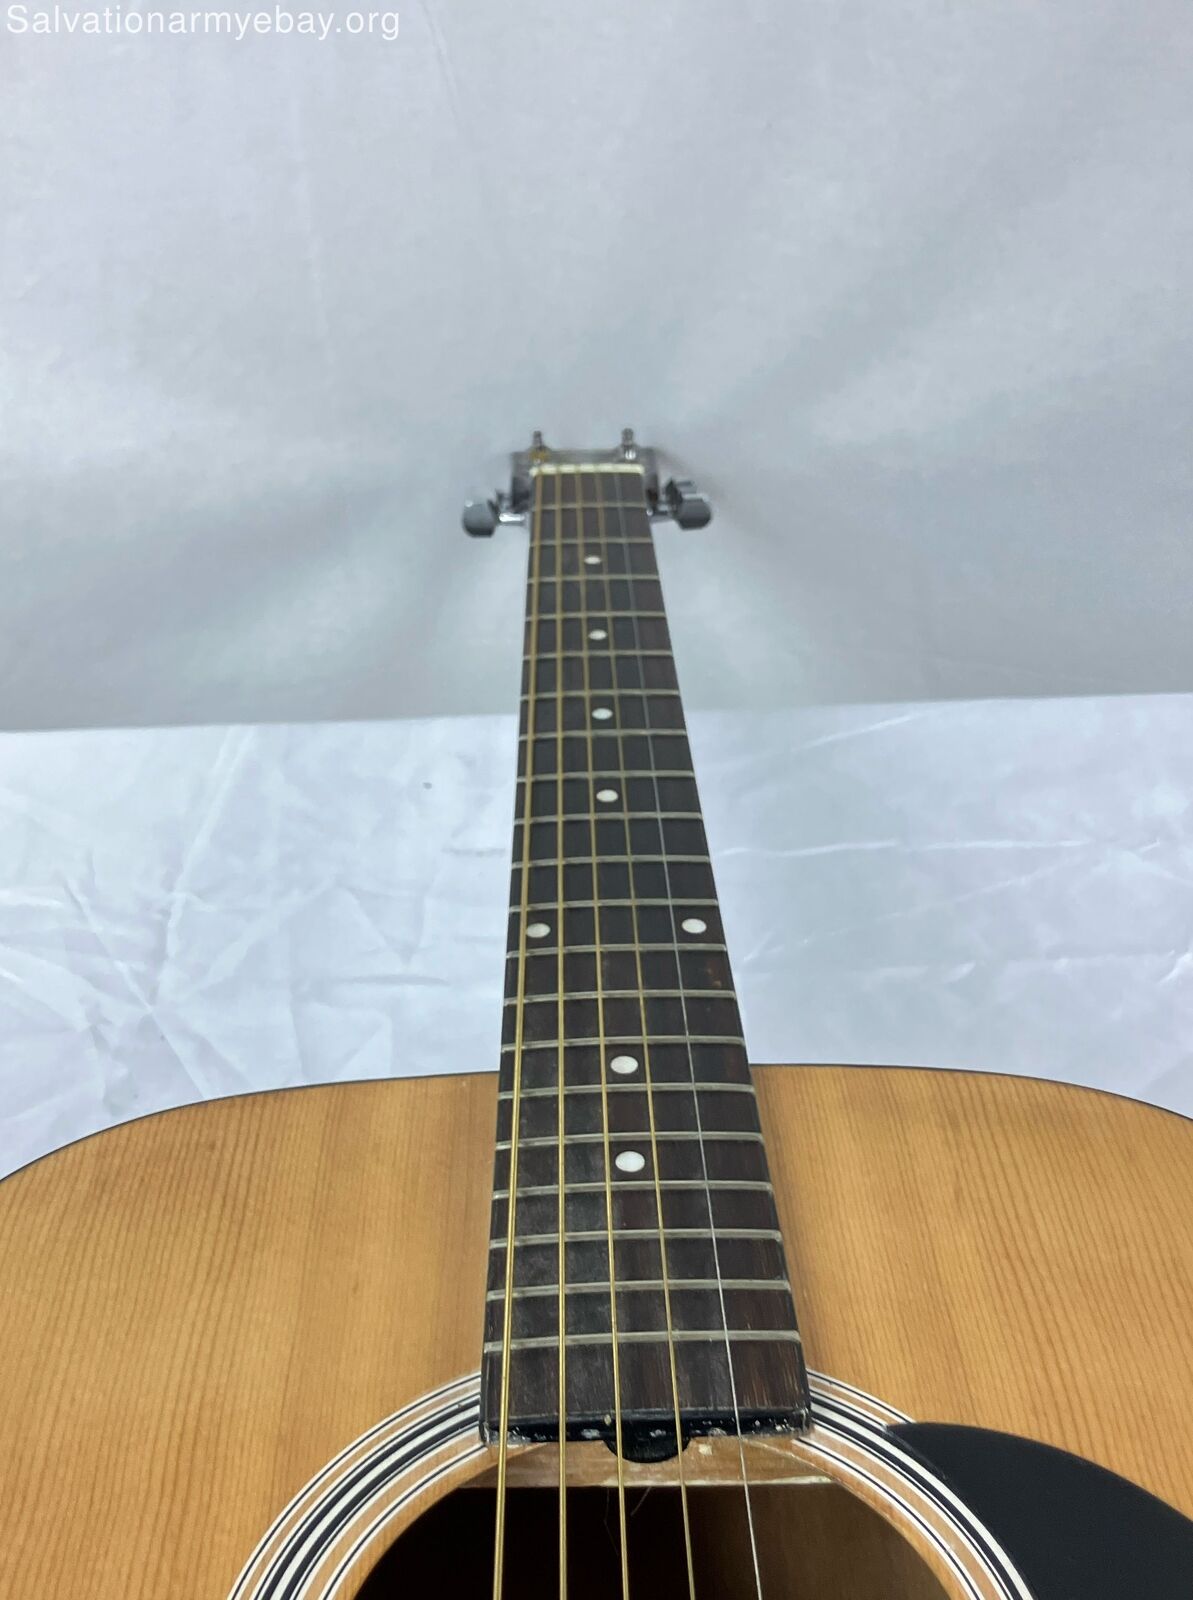 Rogue RA100D Acoustic Guitar [Needs New Strings] [Has Slight Chips on Body] 7